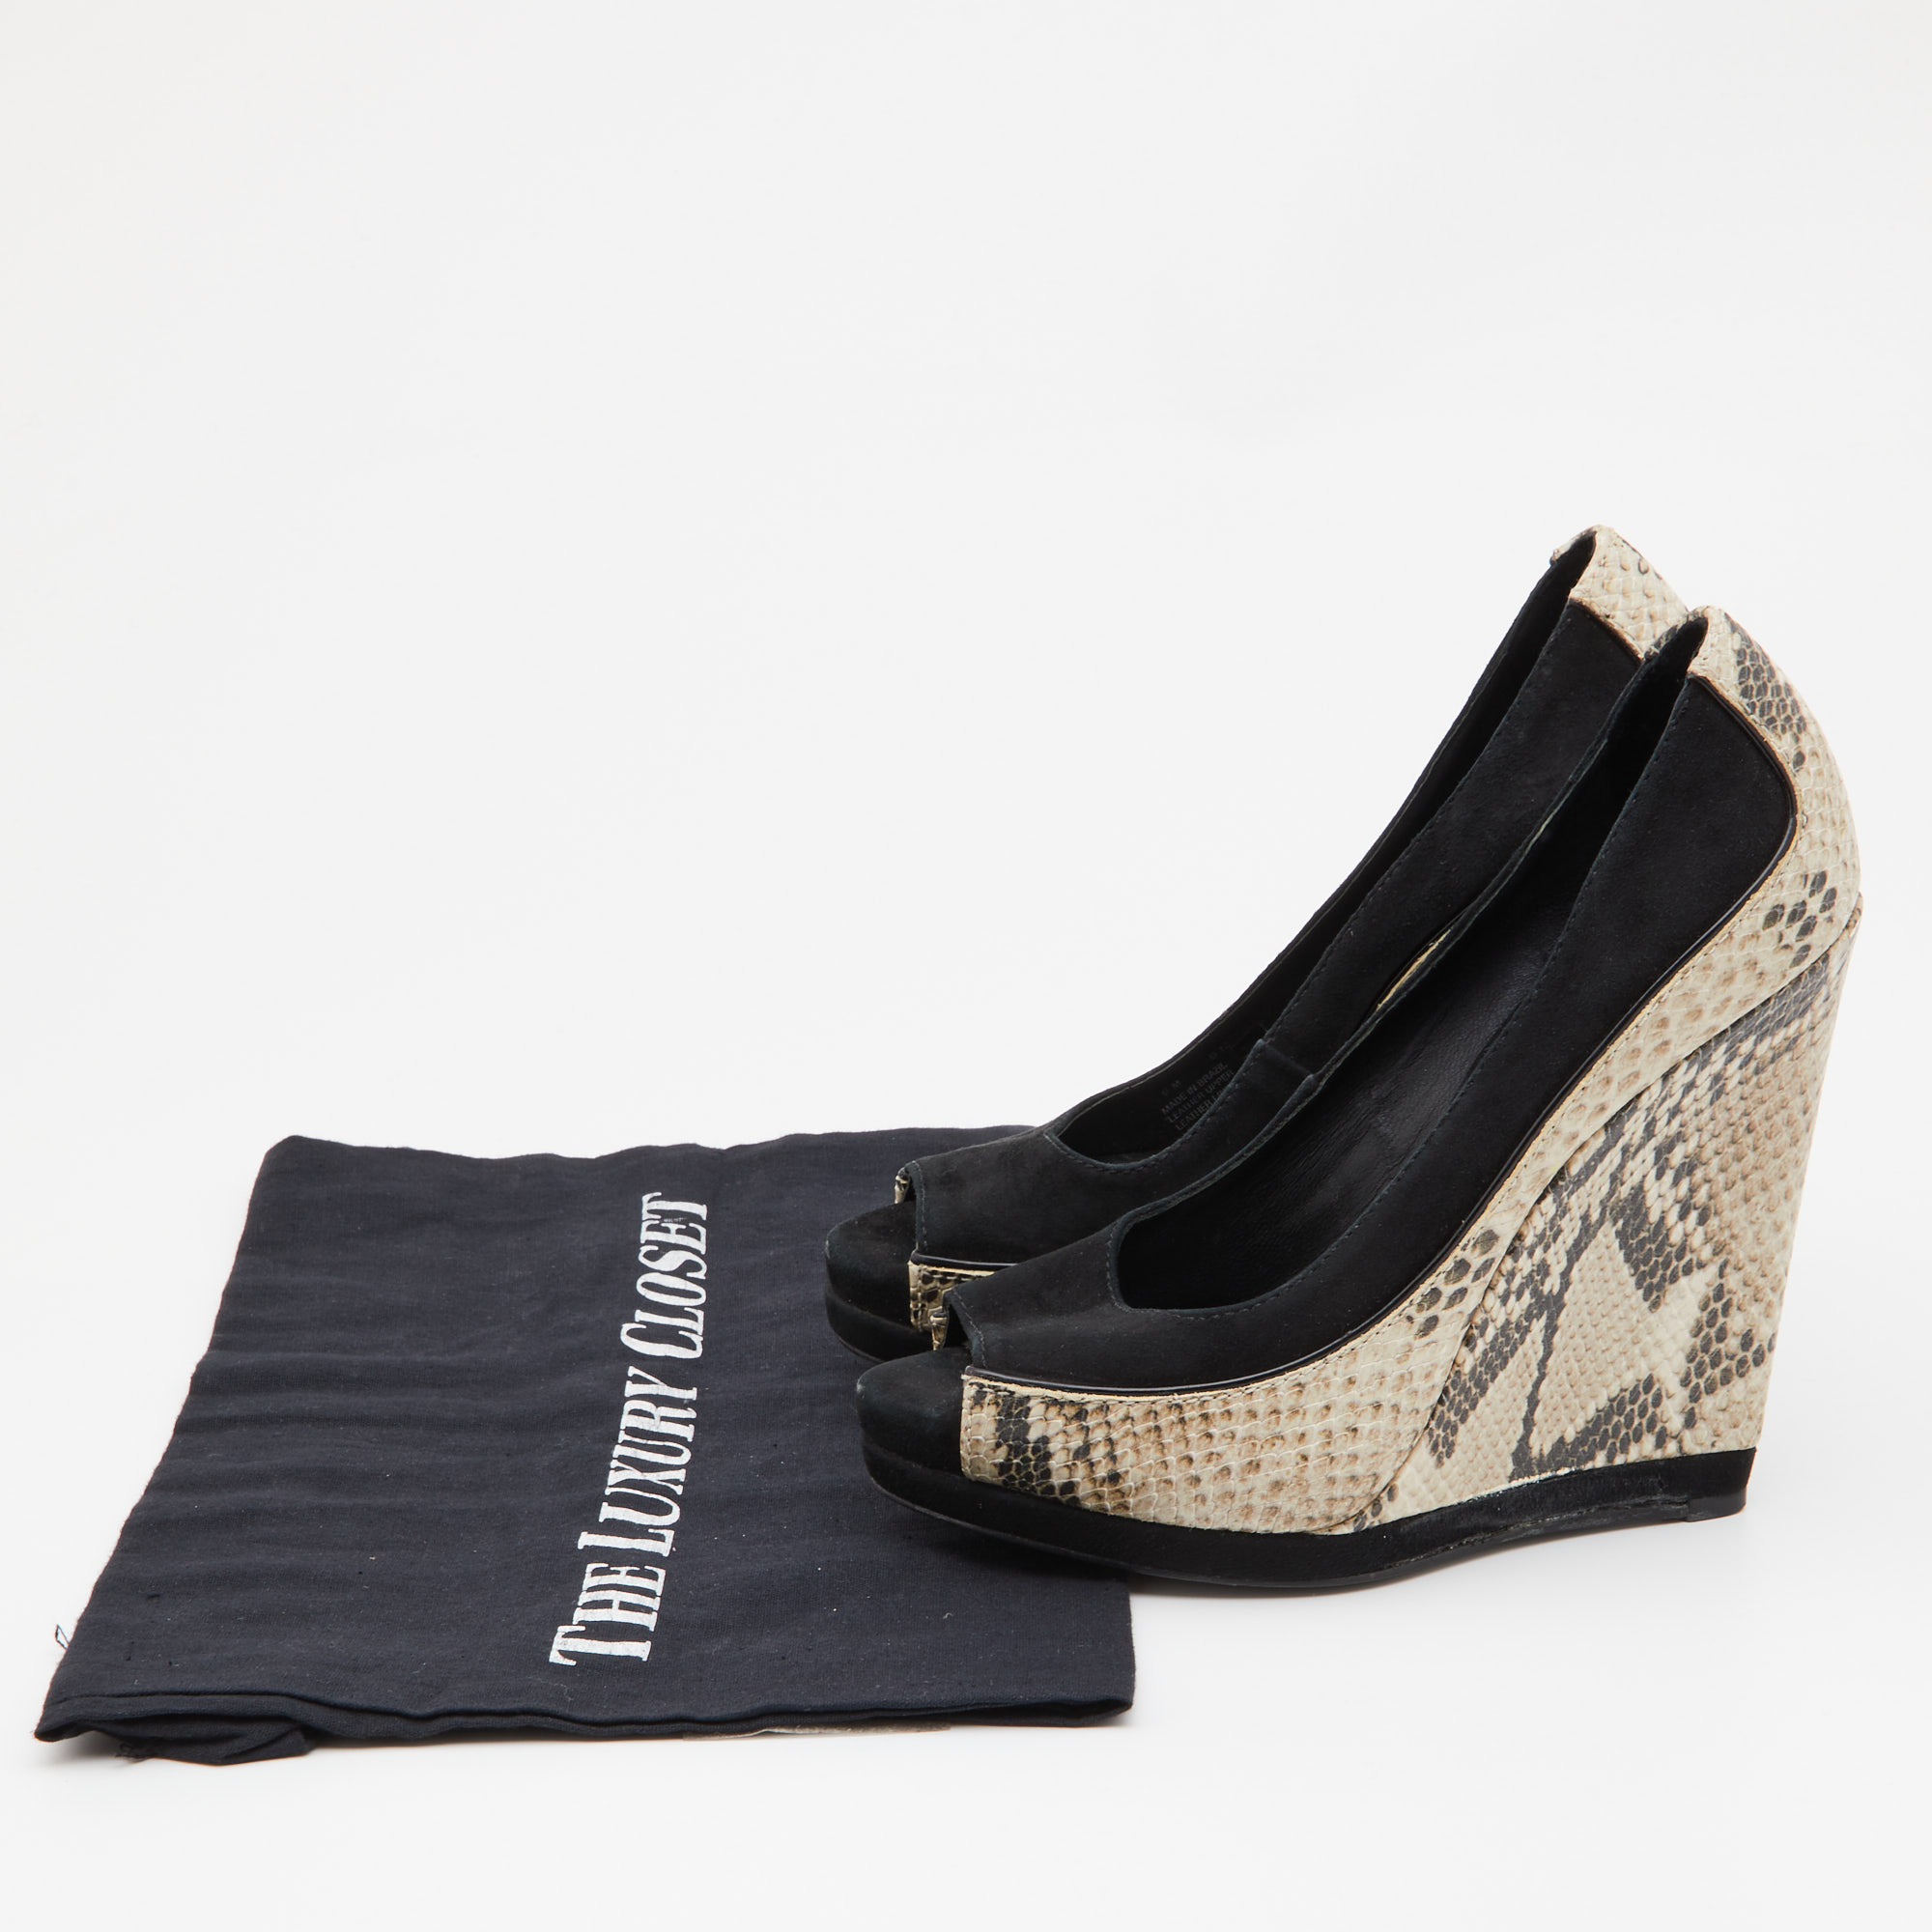 Tory Burch Black/Grey Suede And Python Embossed Leather Sandra Wedge Peep Toe Pumps Size 36.5